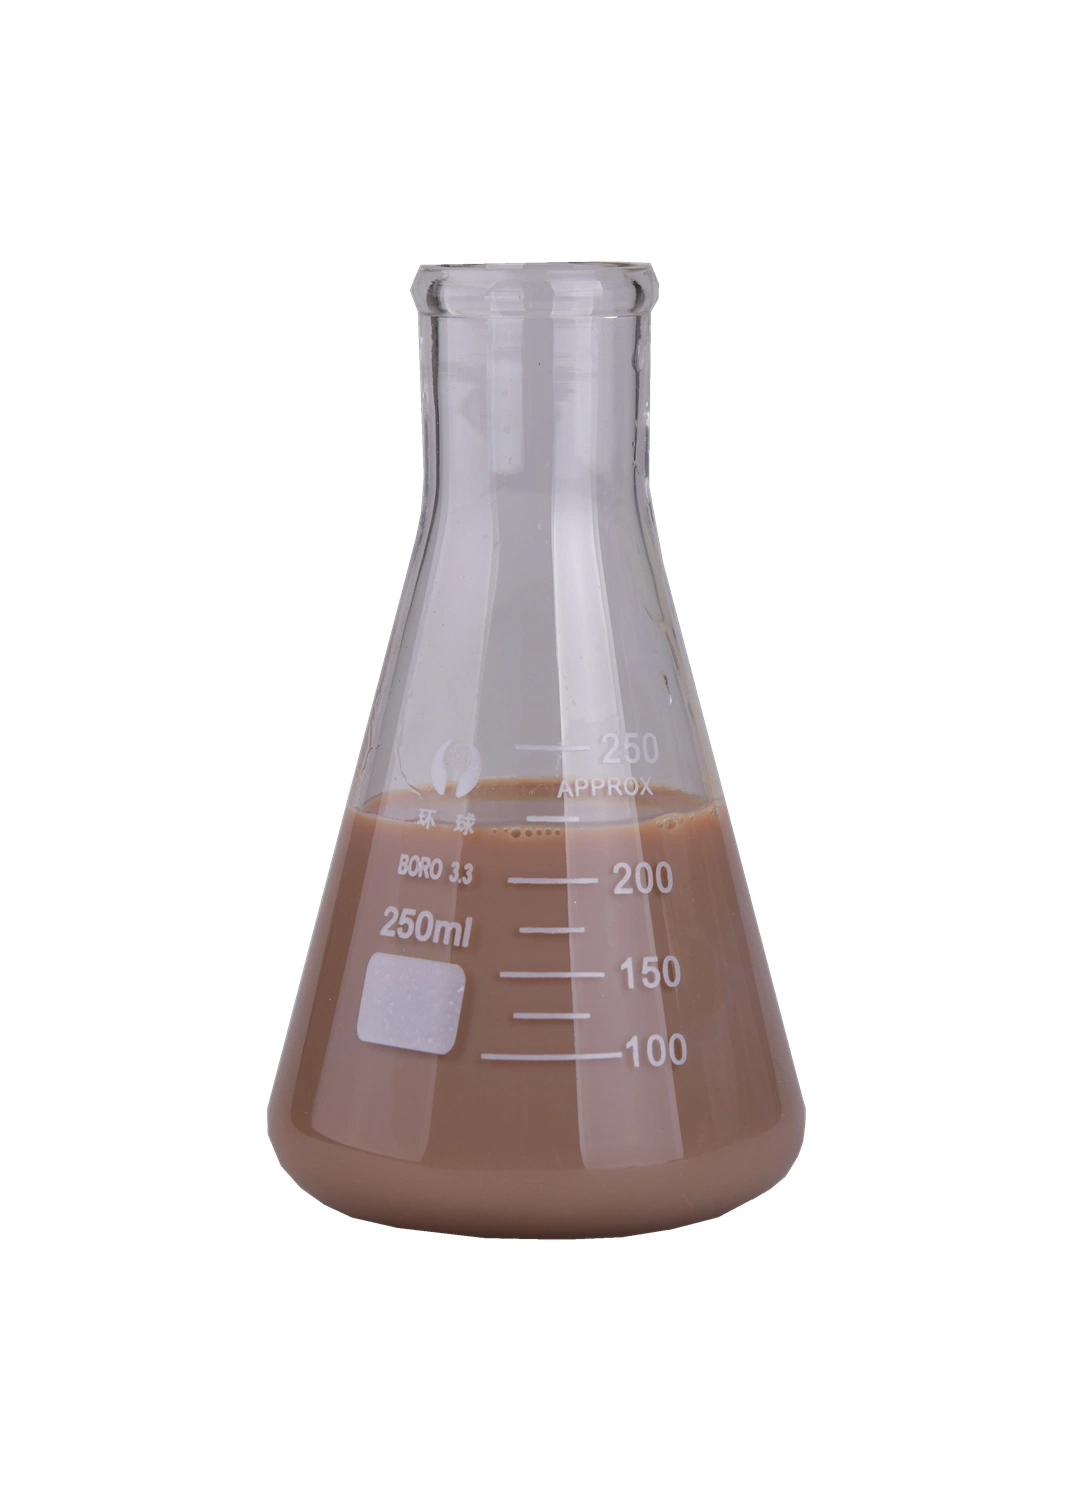 Cationic Surface Sizing Agent, Used for Waterproofing of Paper Surfaces. Coating Chemicals